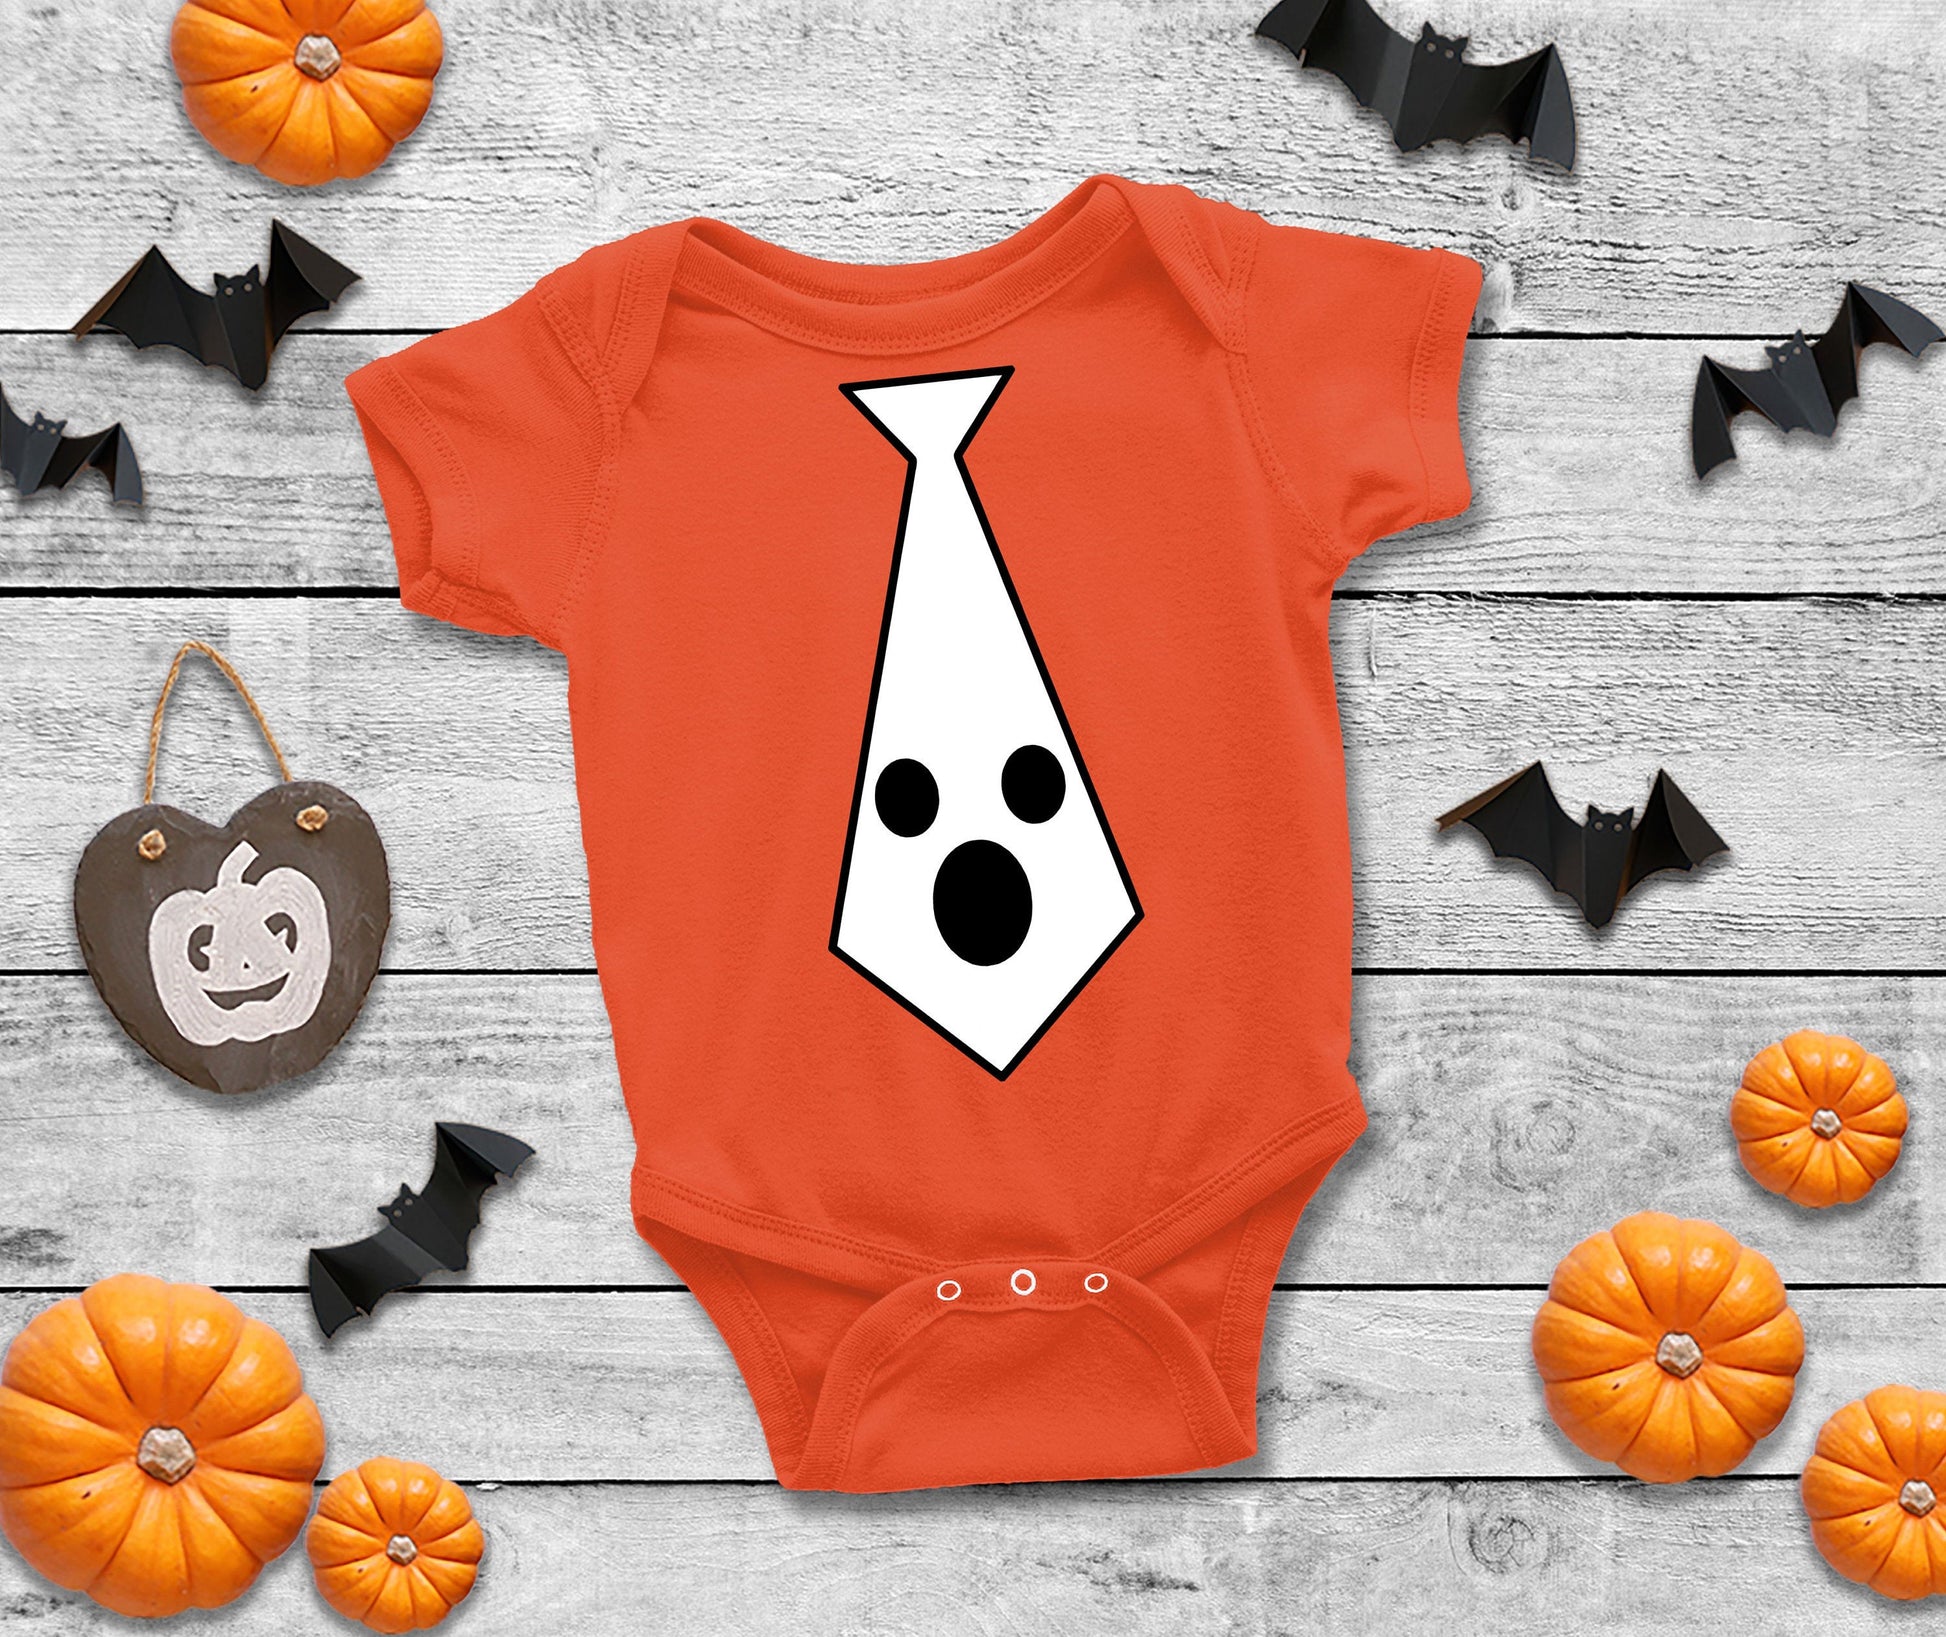 Ghost Tie Infant or Toddler Halloween Shirt or Bodysuit - My First Halloween - baby halloween - baby boy halloween shirt - toddler boy shirt